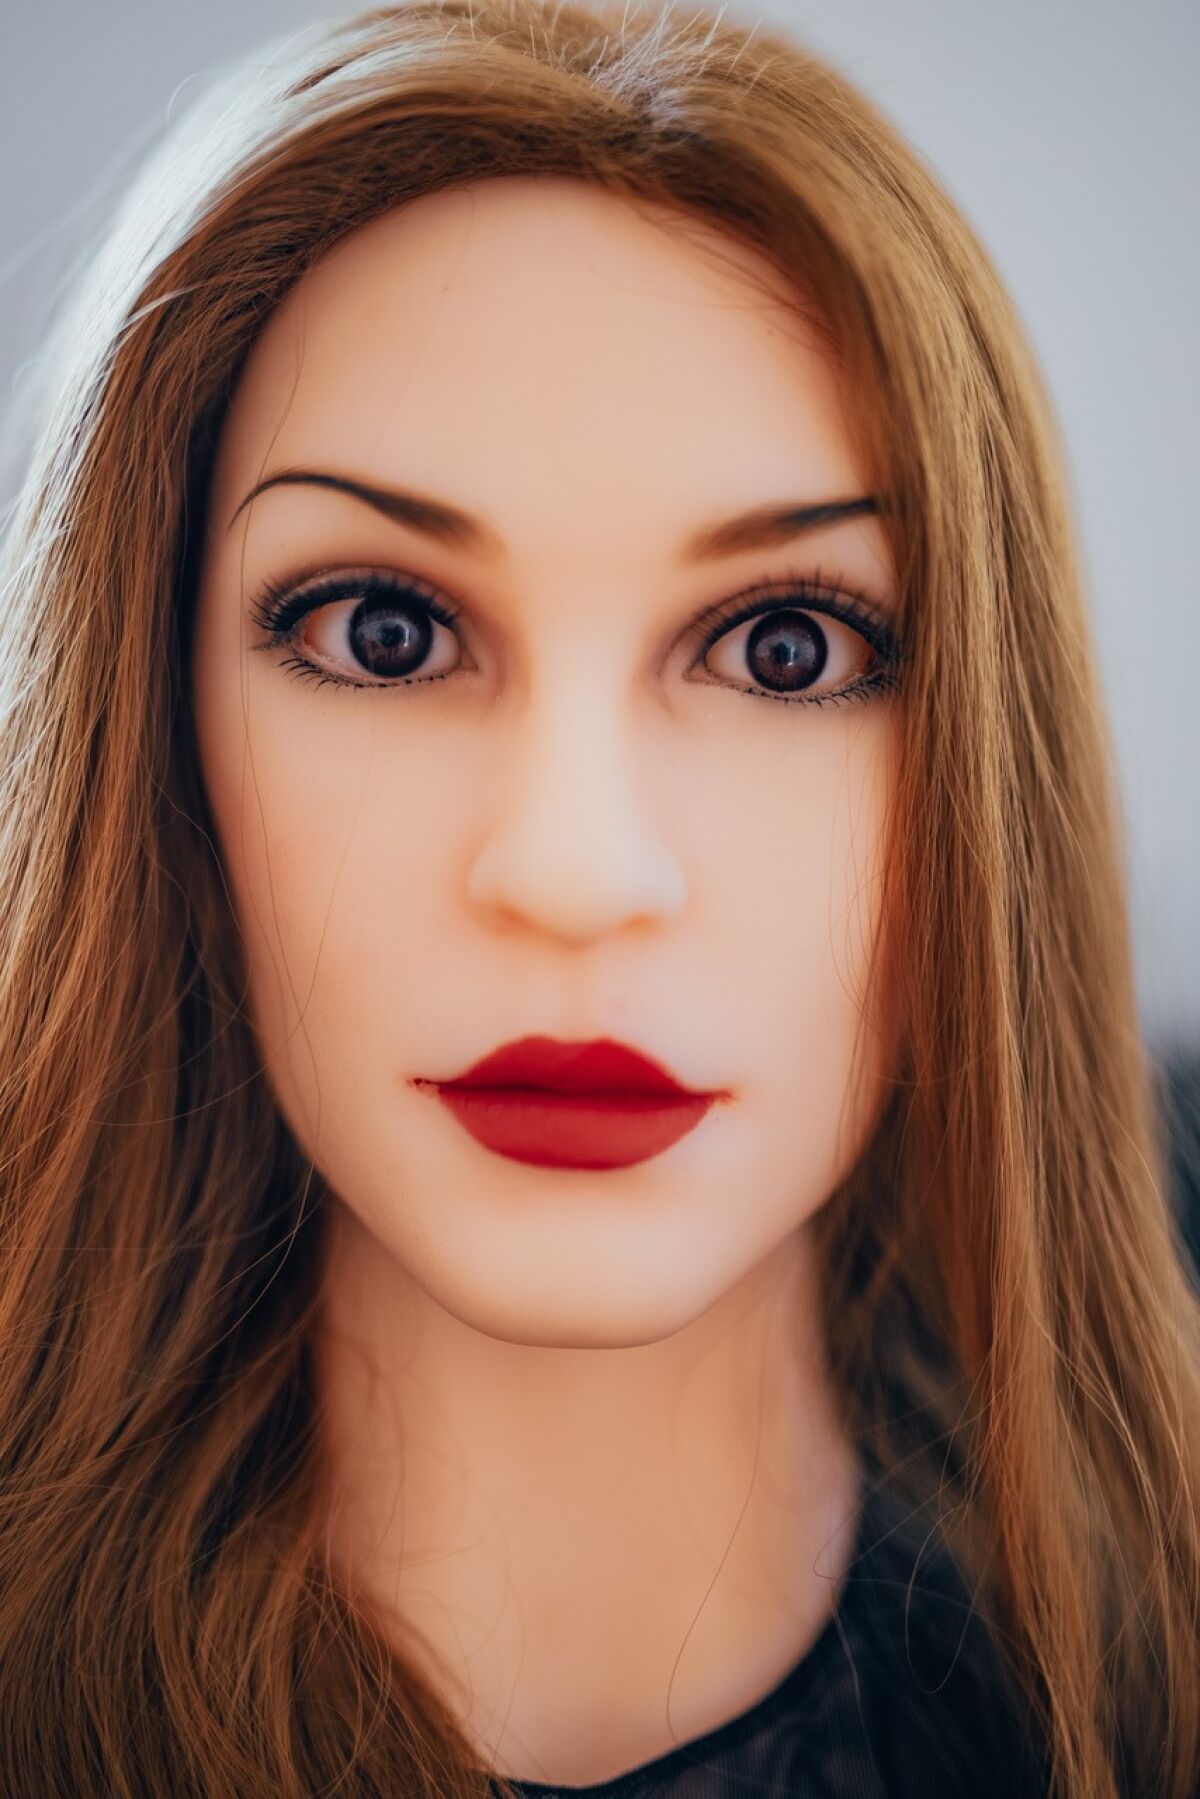 A photograph of a woman with enlarged eyes and lips.